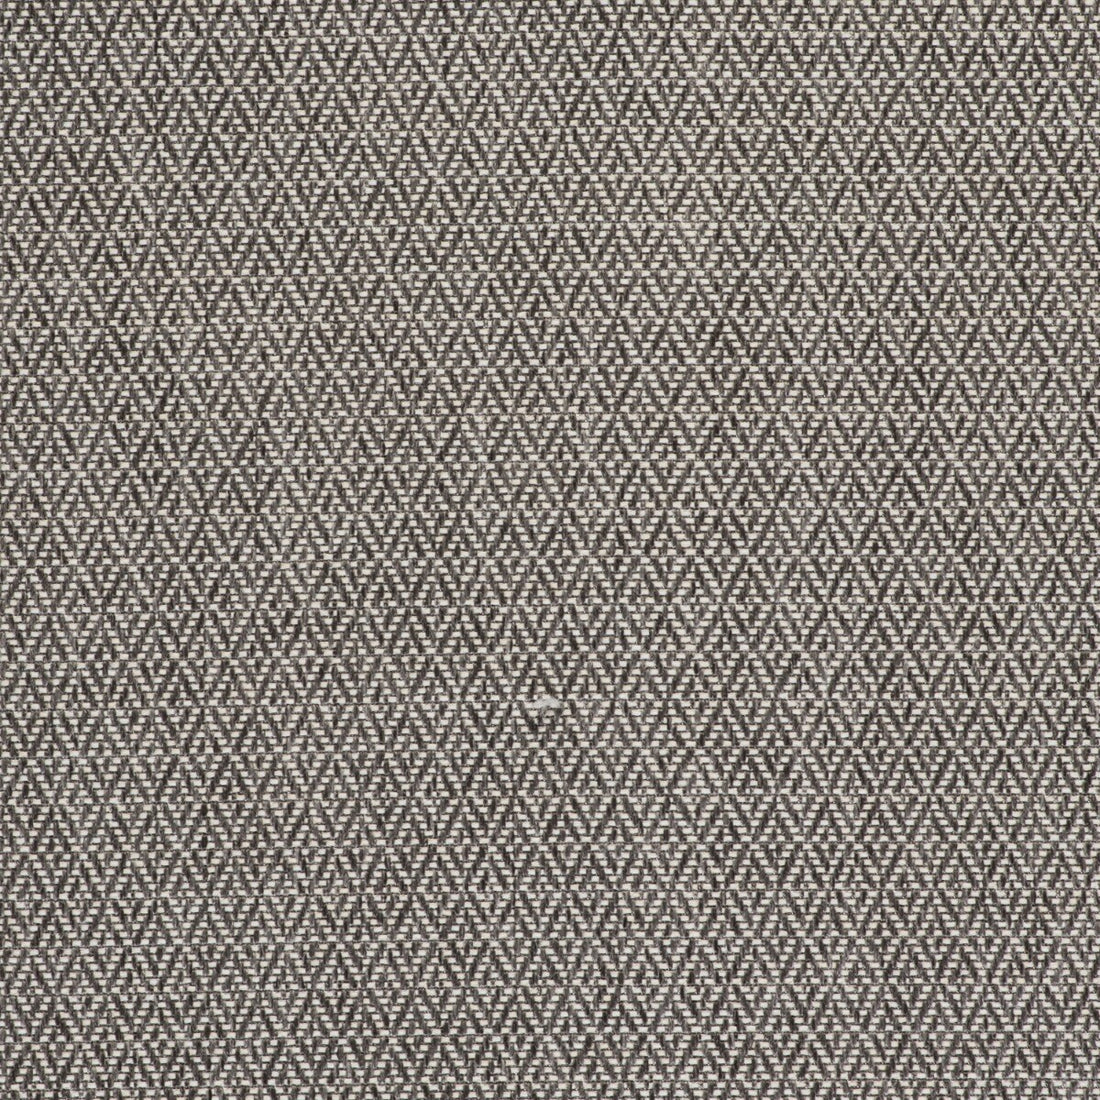 Rombos fabric in gris color - pattern GDT5509.003.0 - by Gaston y Daniela in the Gaston Libreria collection